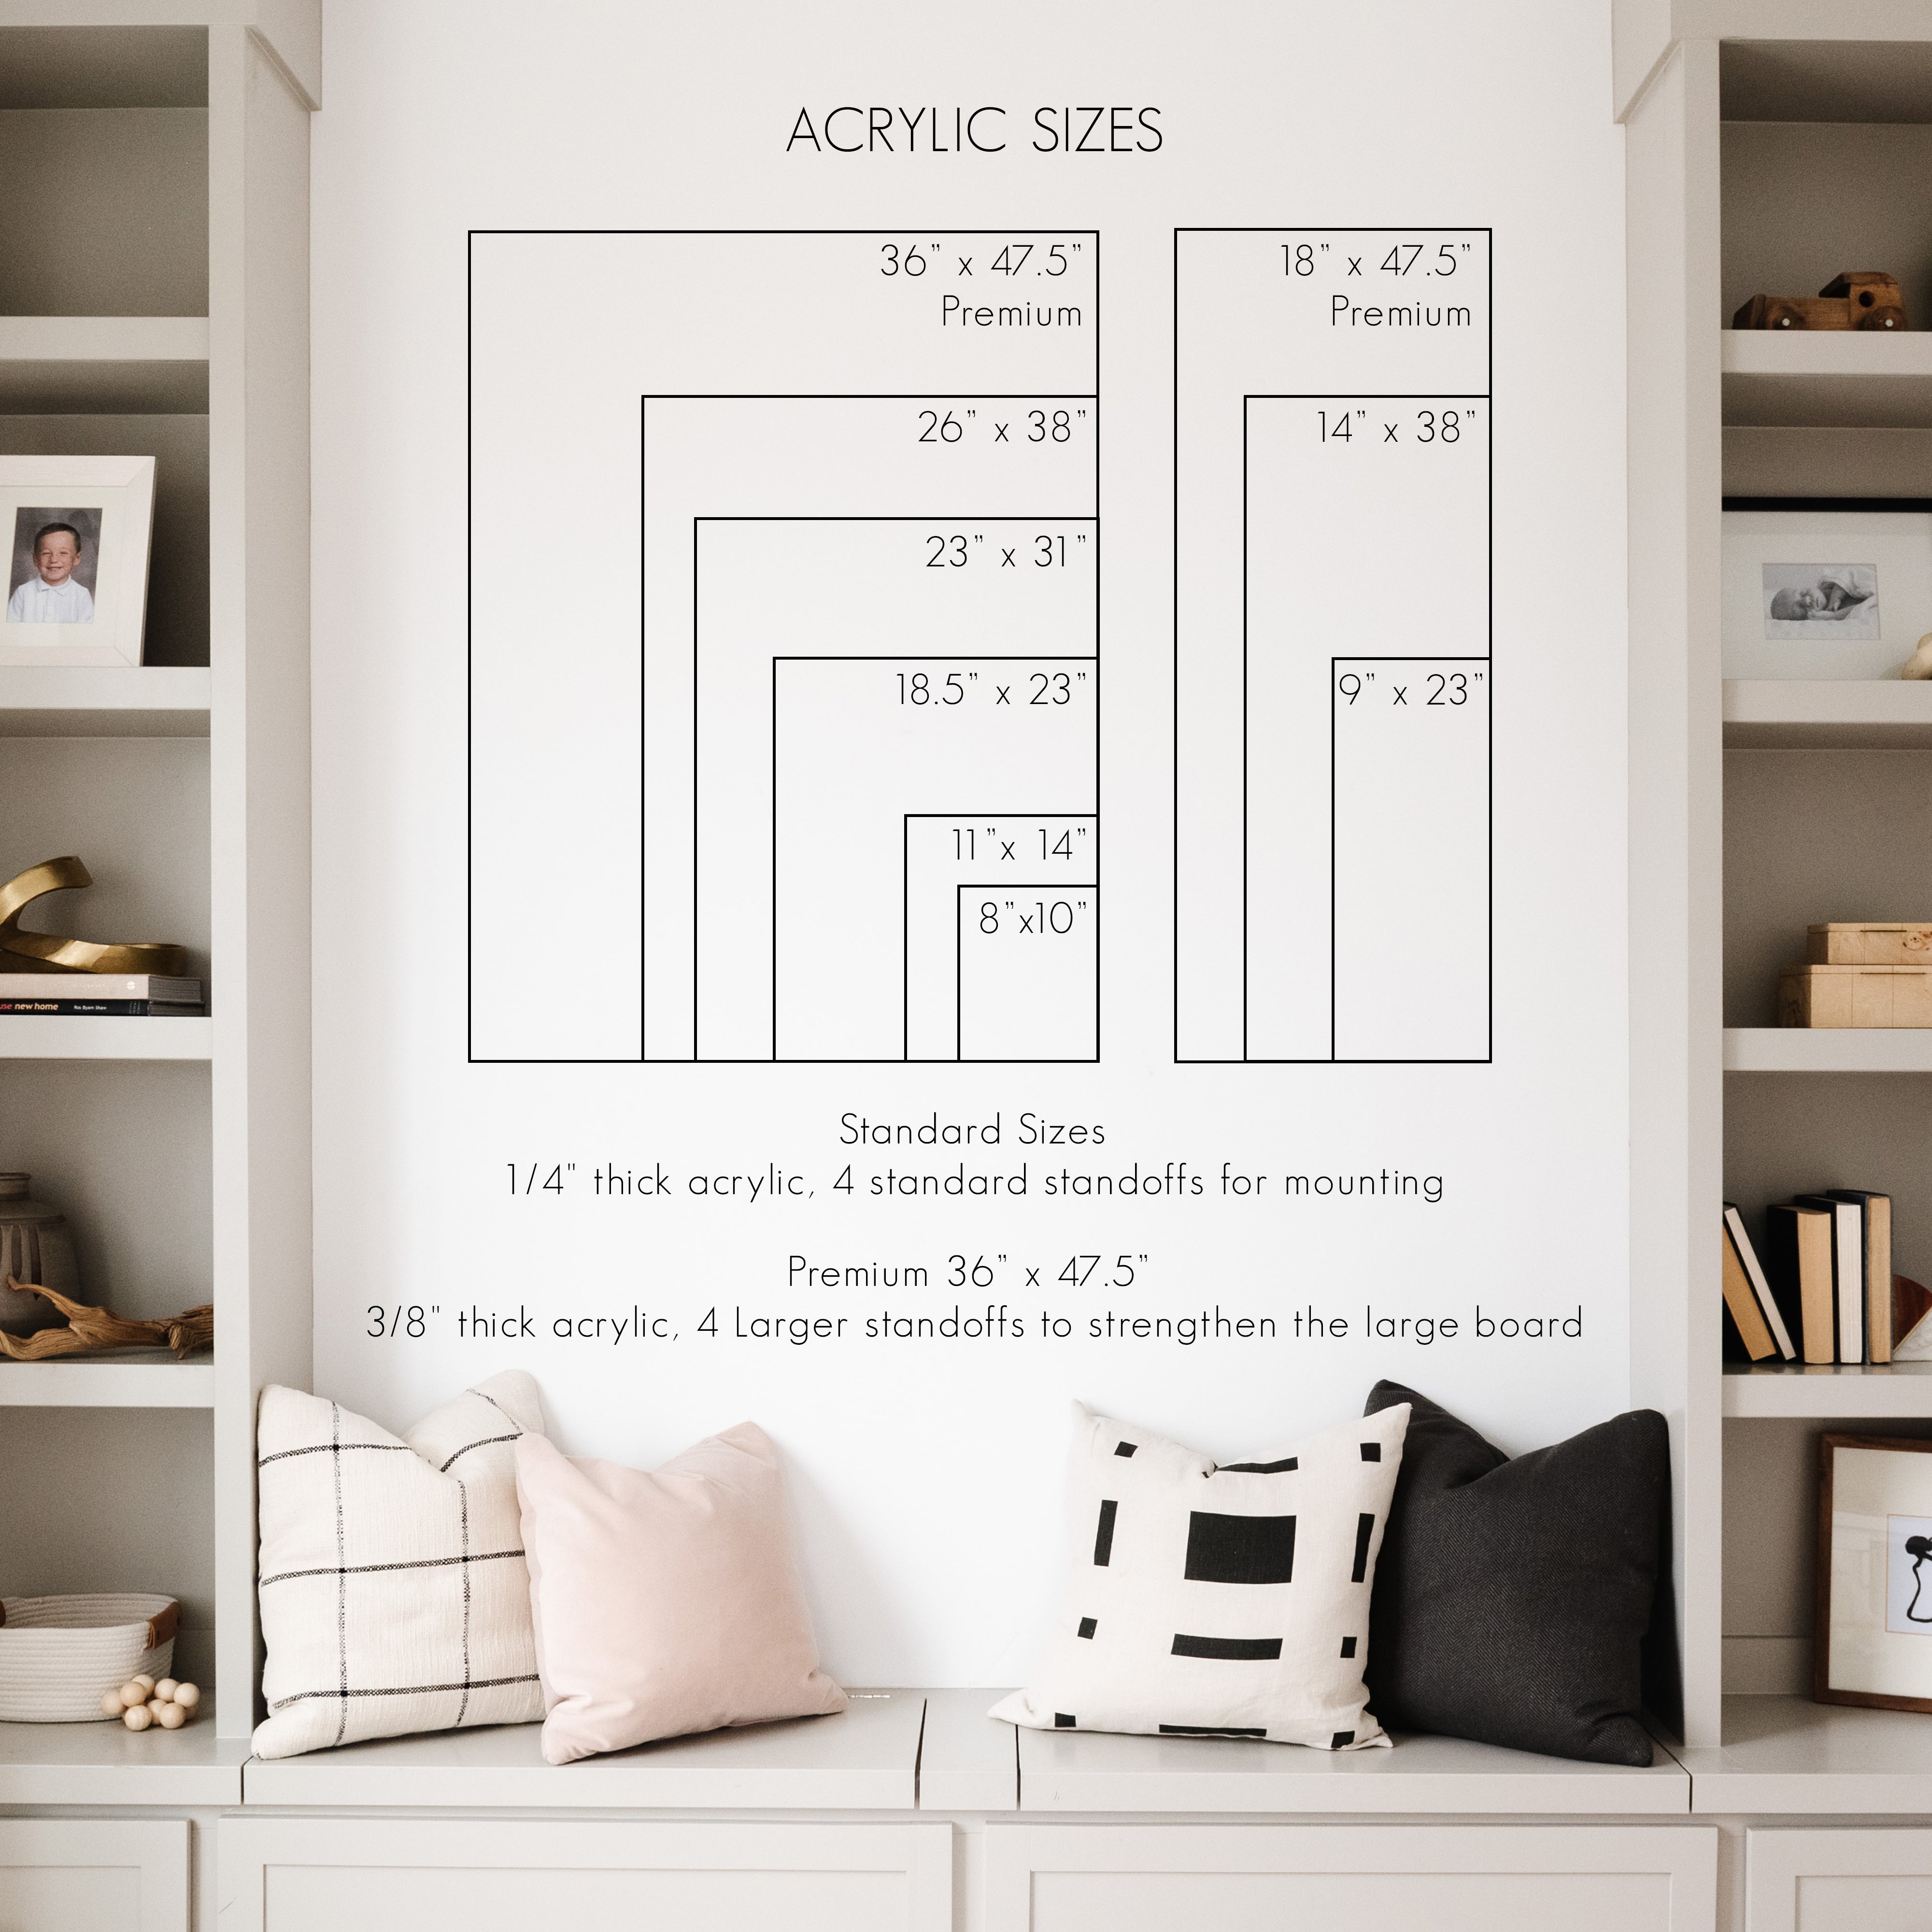 Monthly Frosted Acrylic Calendar + 5 Sections | Vertical Madi